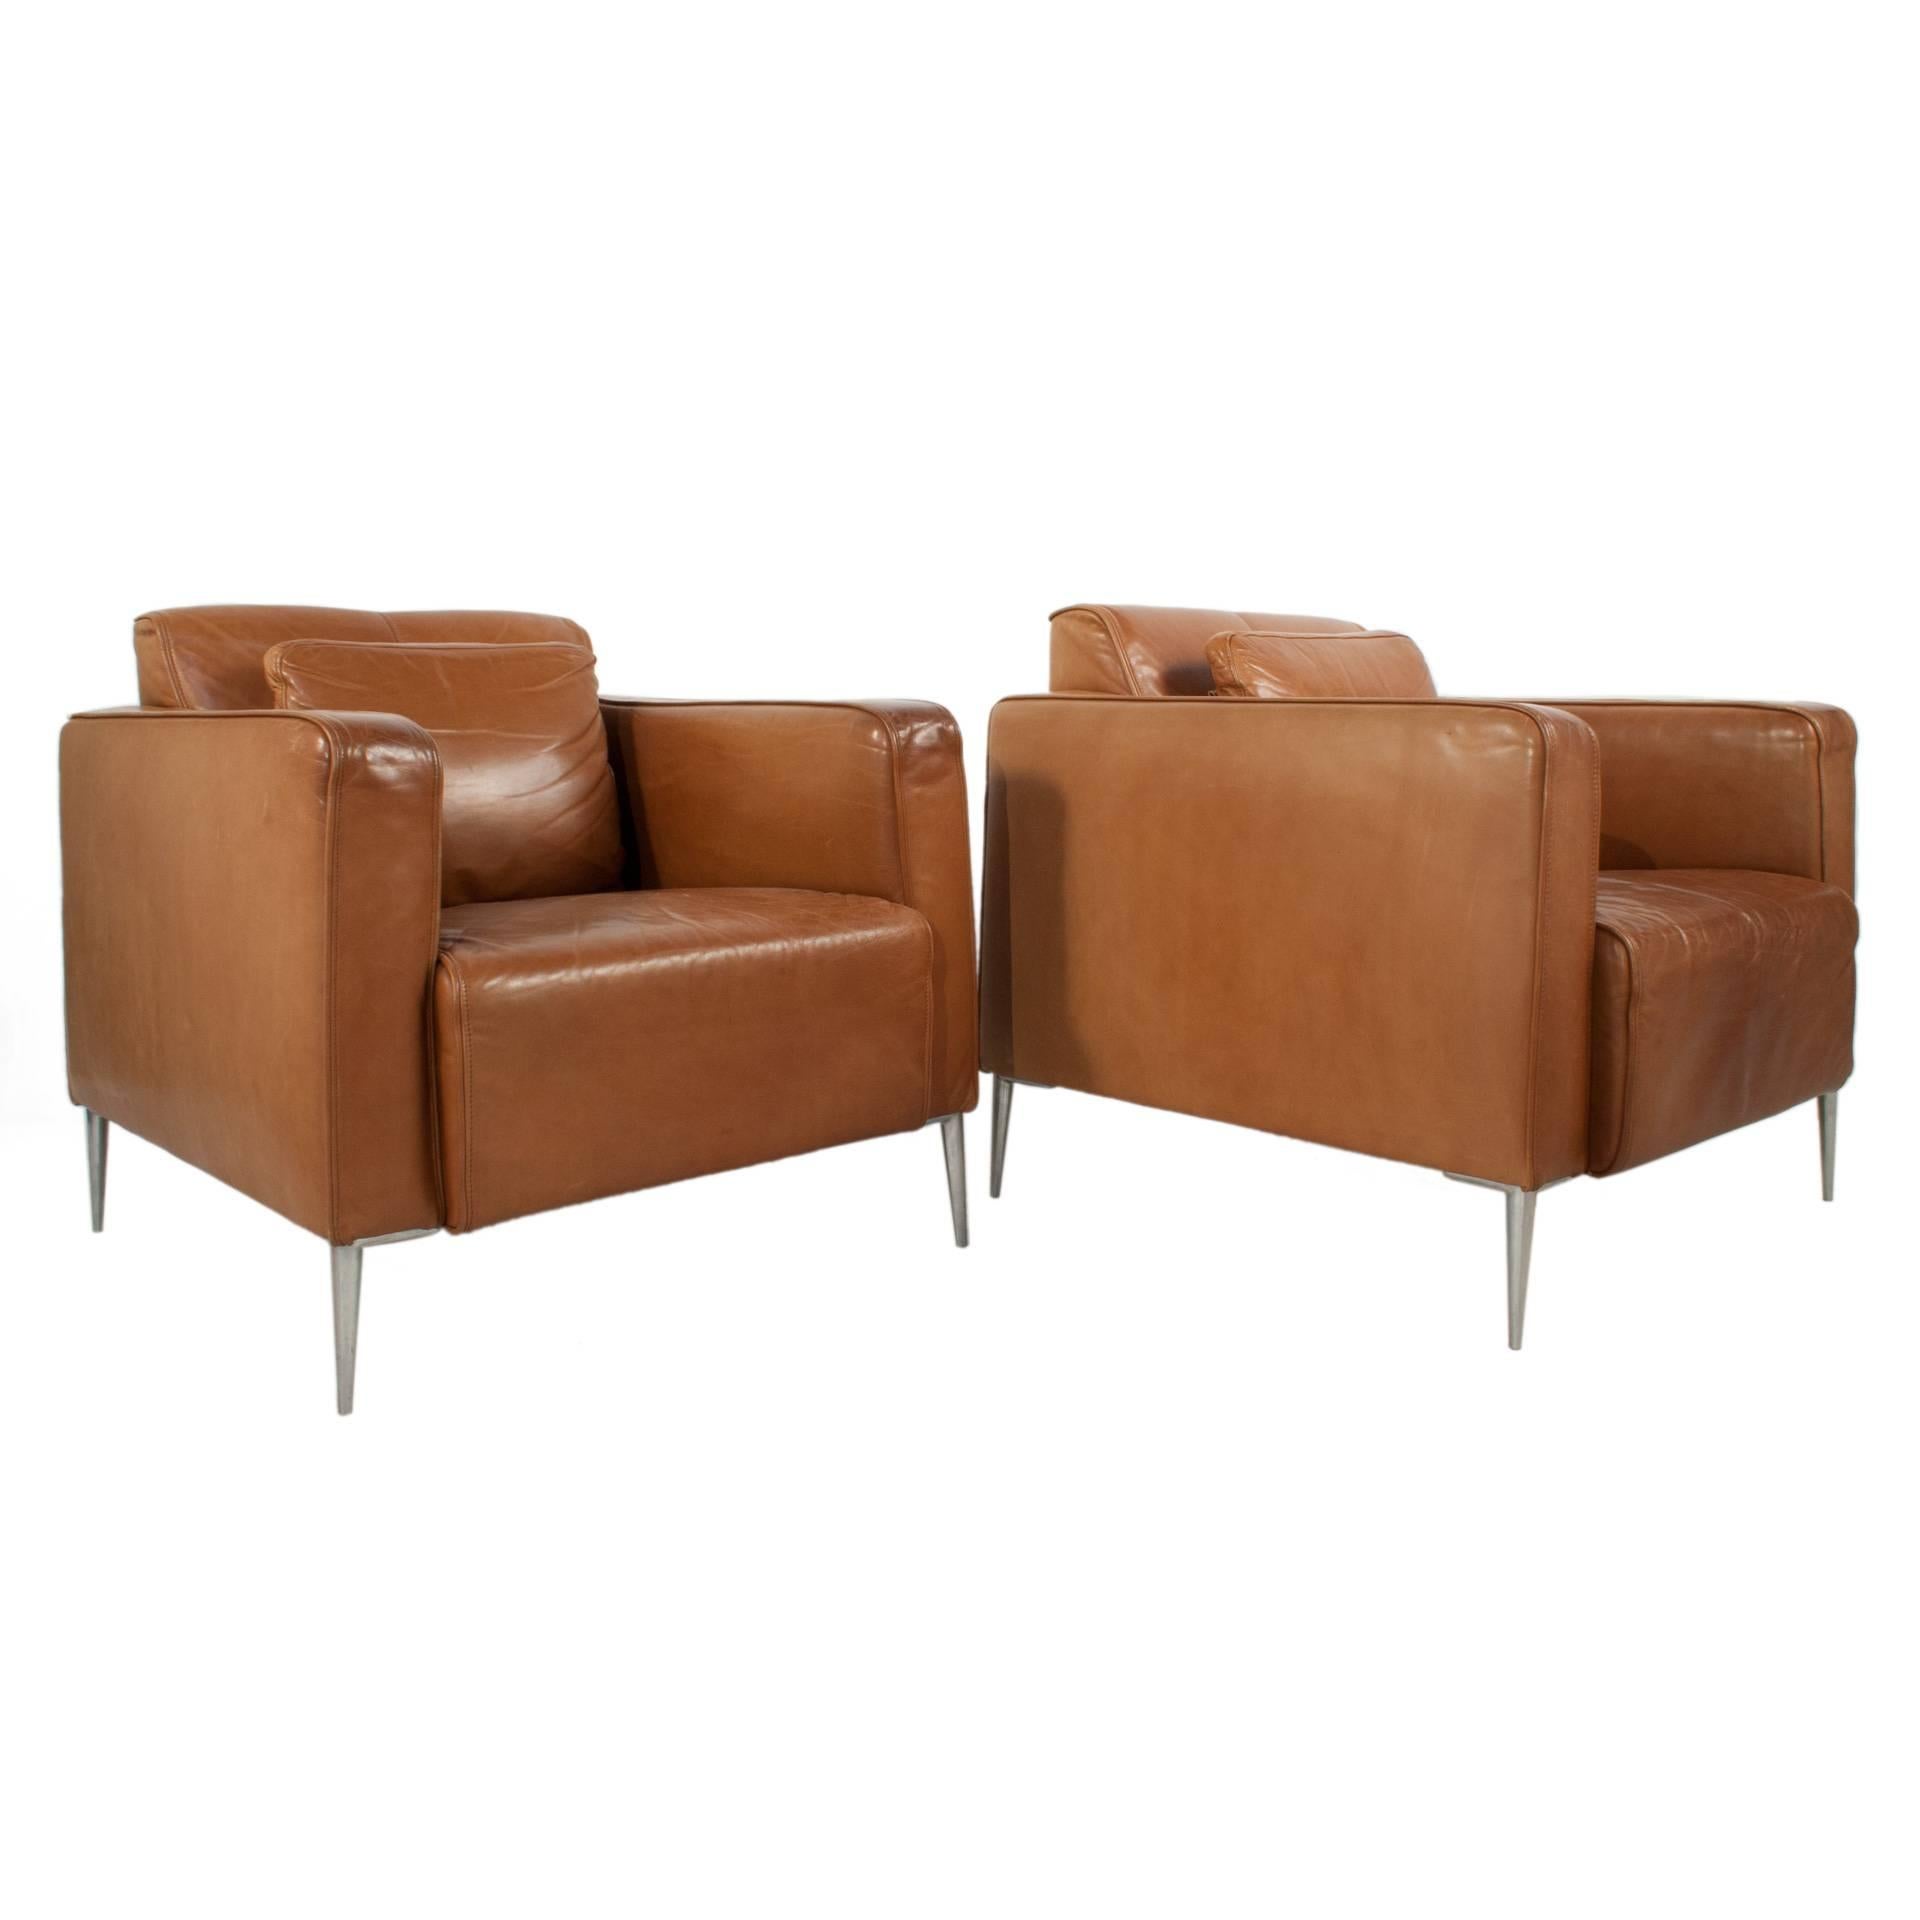 Pair of leather club chairs with steel legs.